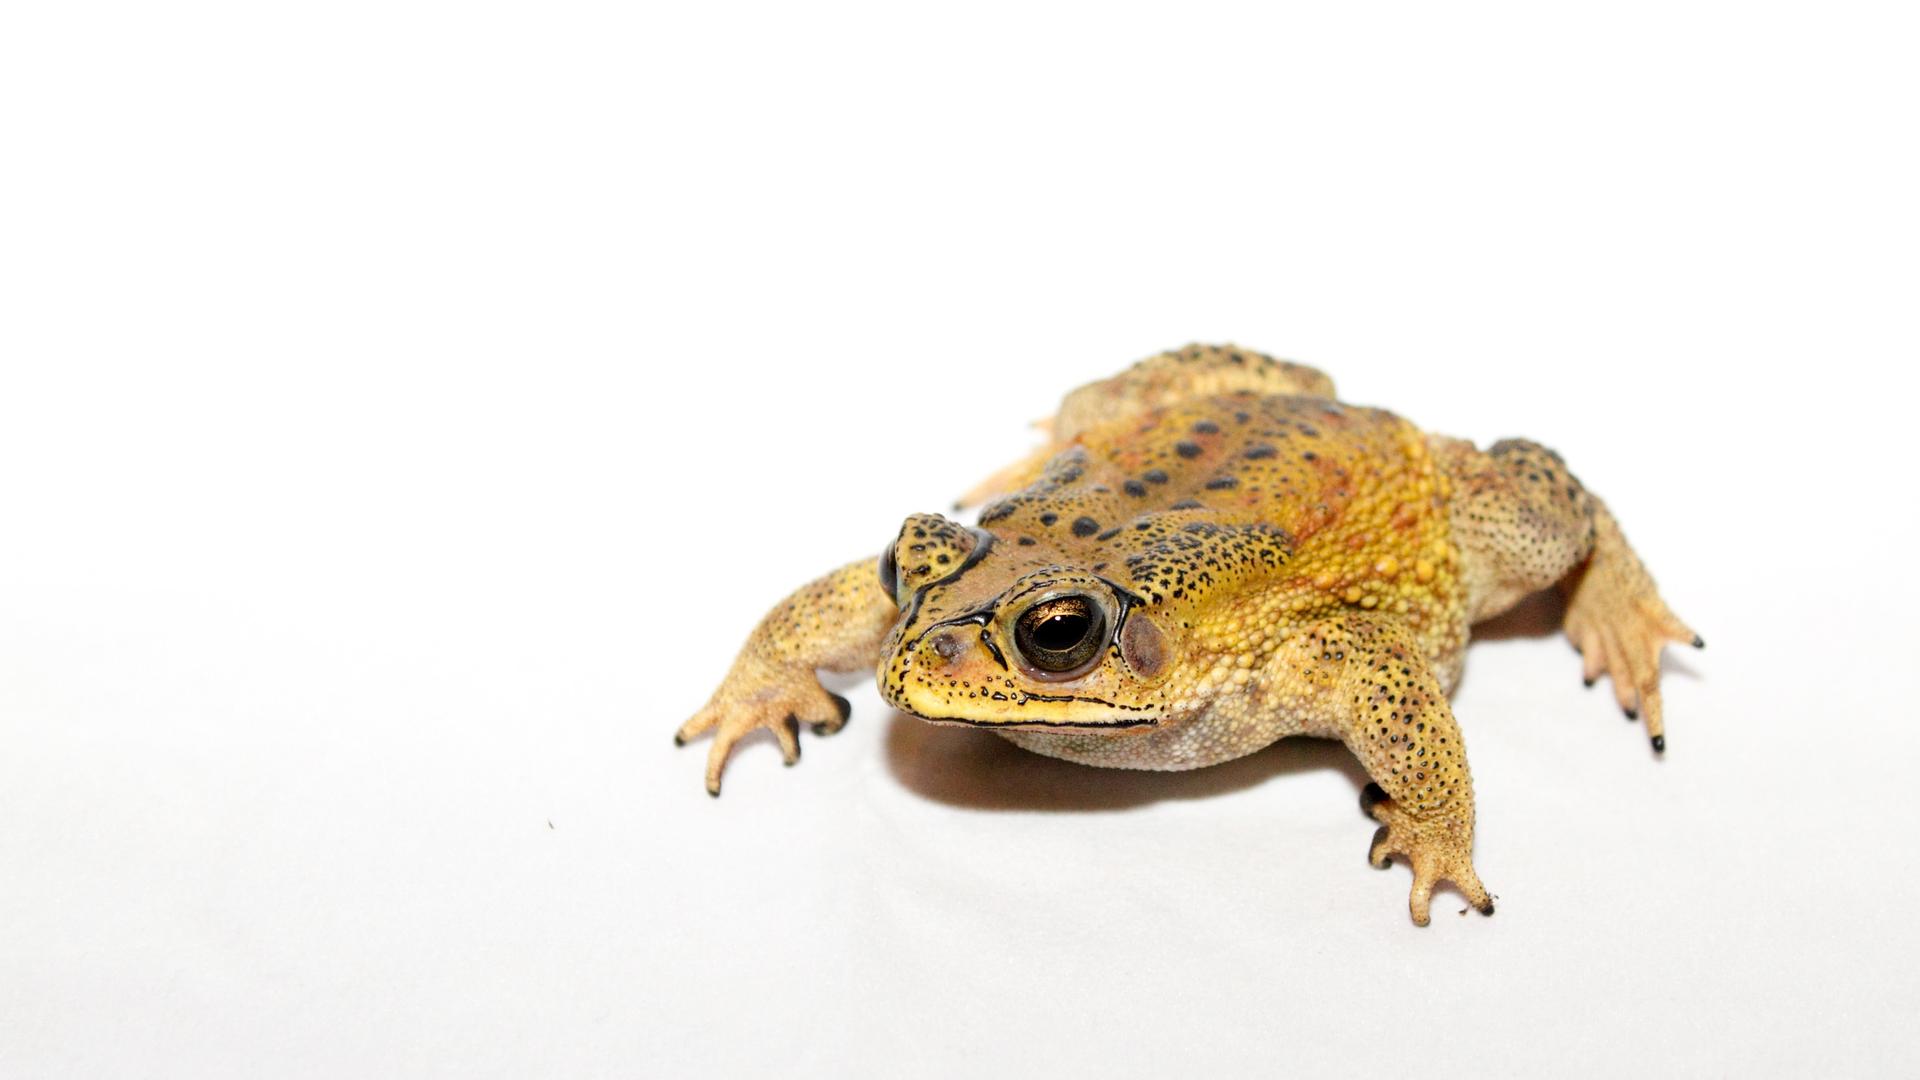 The Asian common toad has lived side by side with other creatures in its native habitat for millennia. But introduced into a new location the mildly poisonous species can wreak havoc on unsuspecting predators. That's why scientists were worried to find th